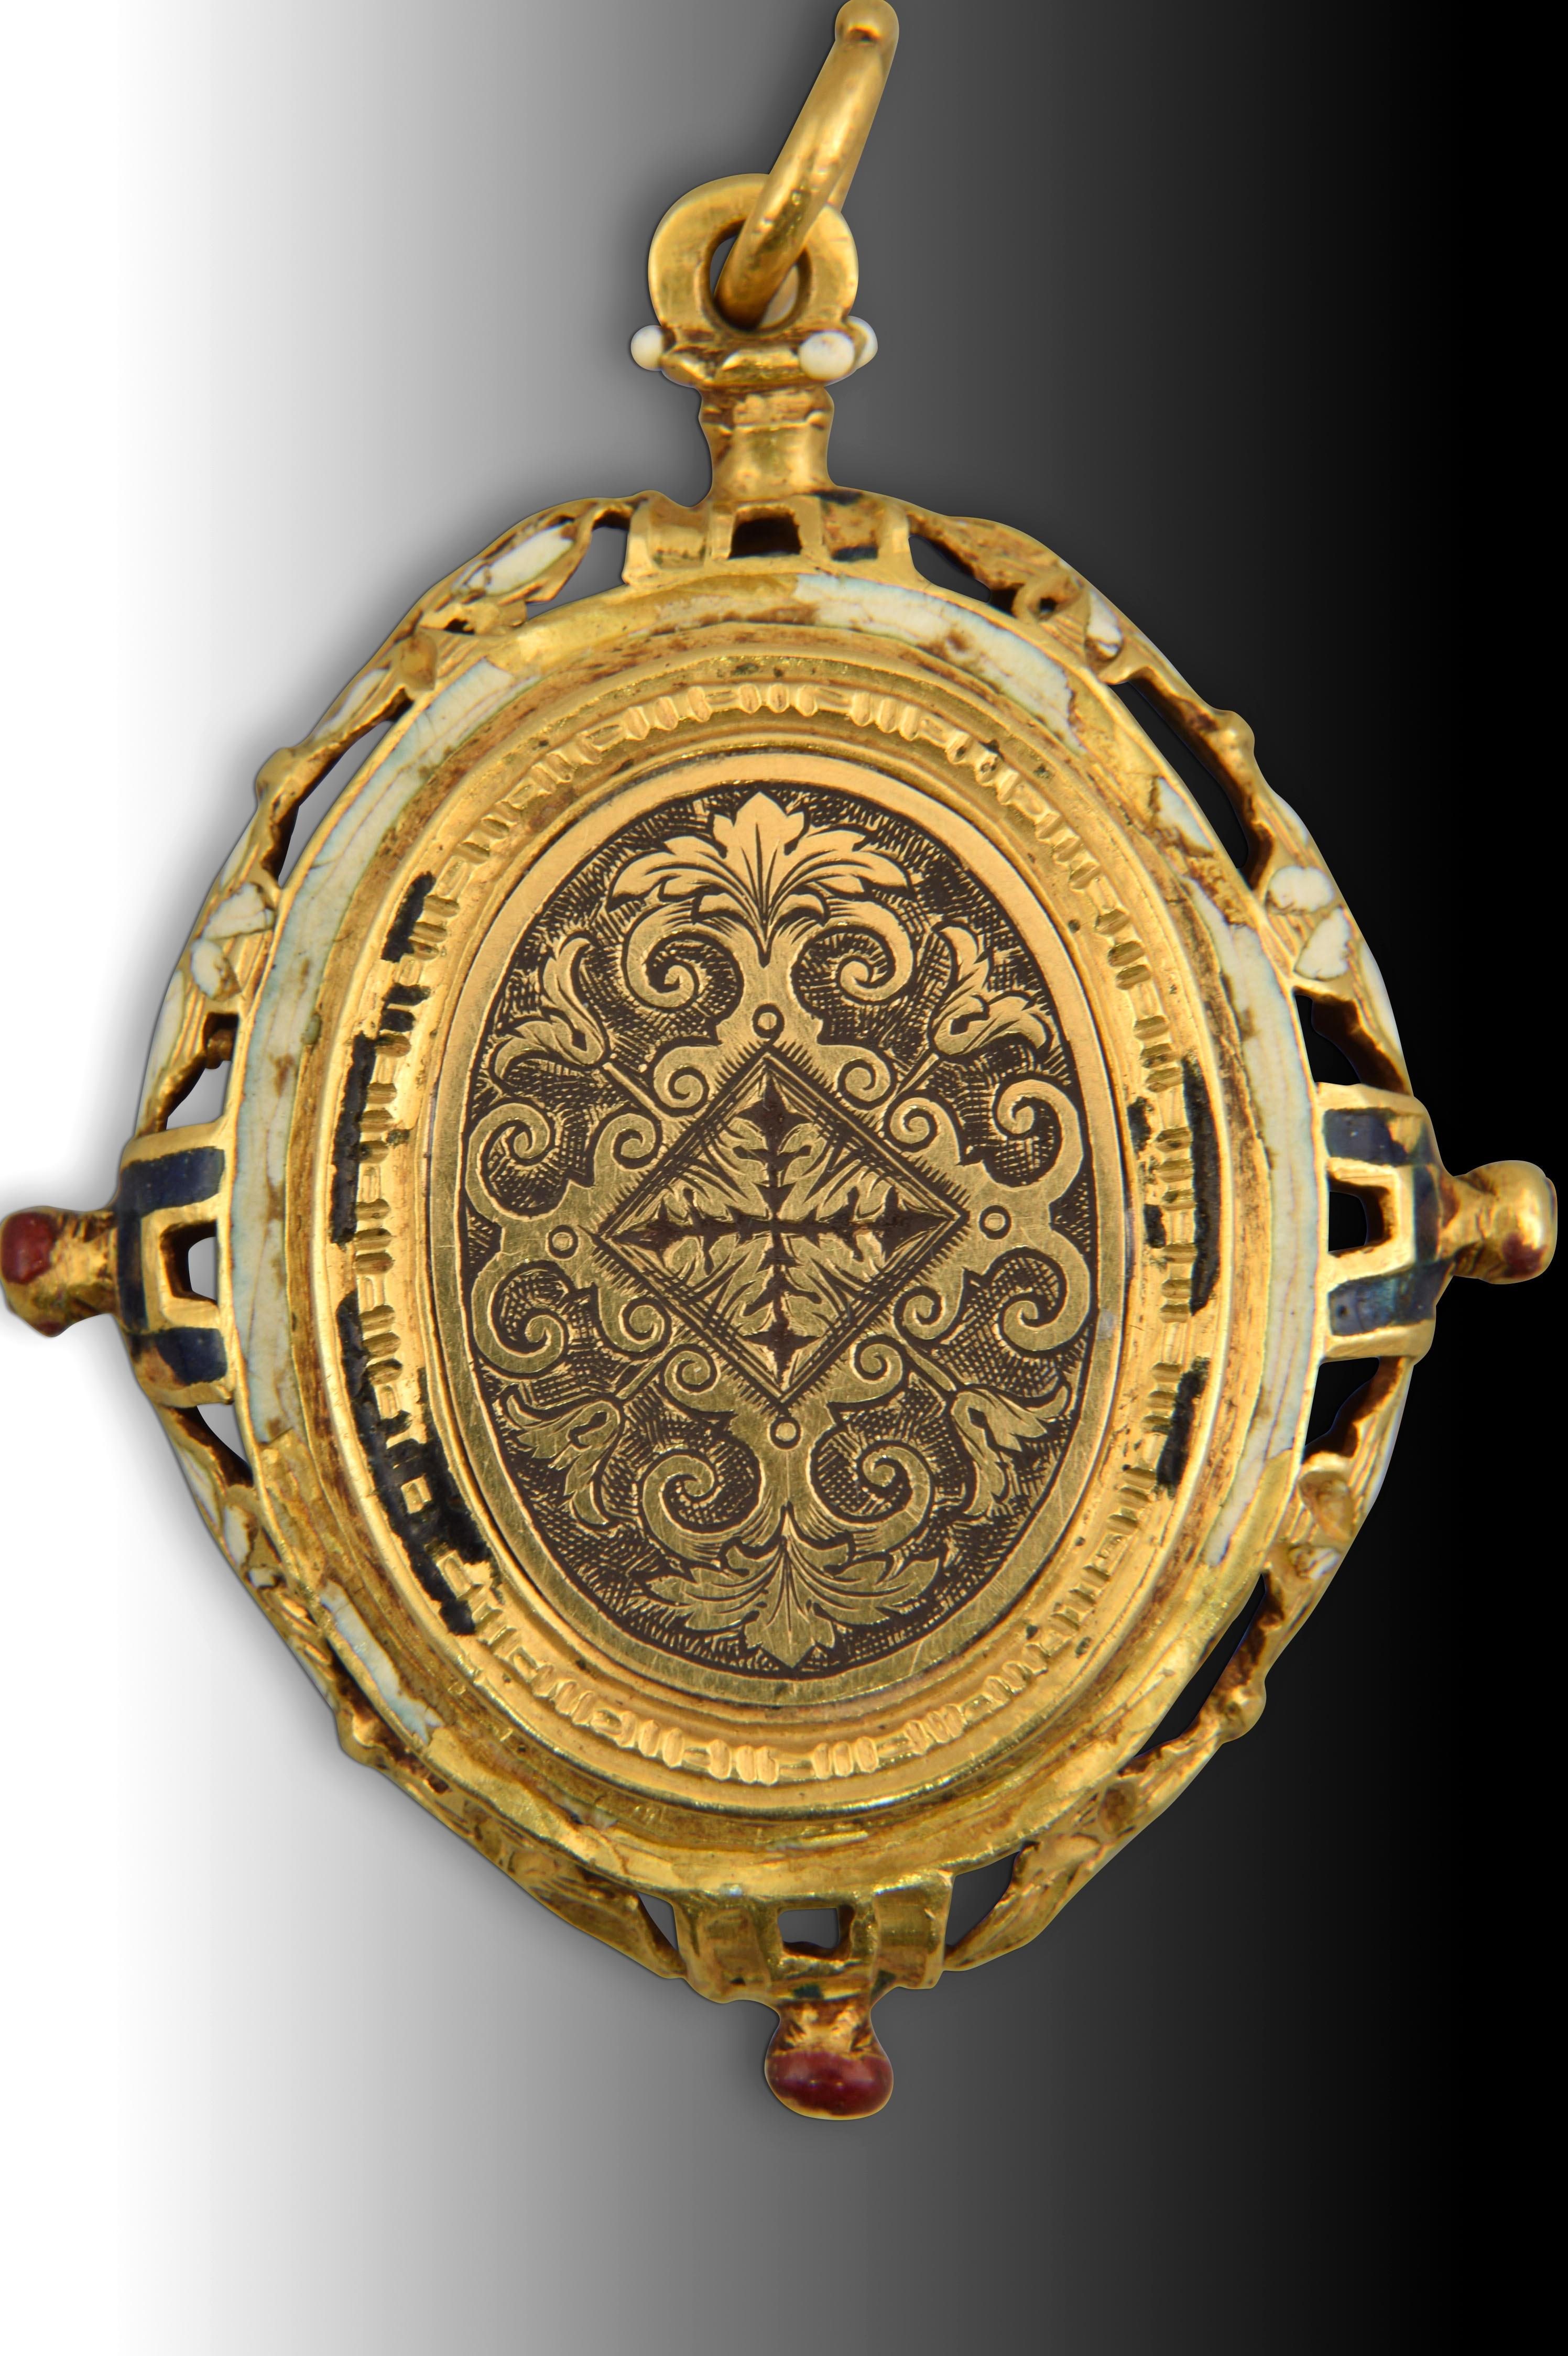 Reliquary pendant. Gold, enamels. XVII-XVIII centuries. 
Oval pendant made of gold in its color that has a ring at the top and an openwork decoration with enamels on the edge of a plant theme. On one of the fronts there is an enamel with a frame